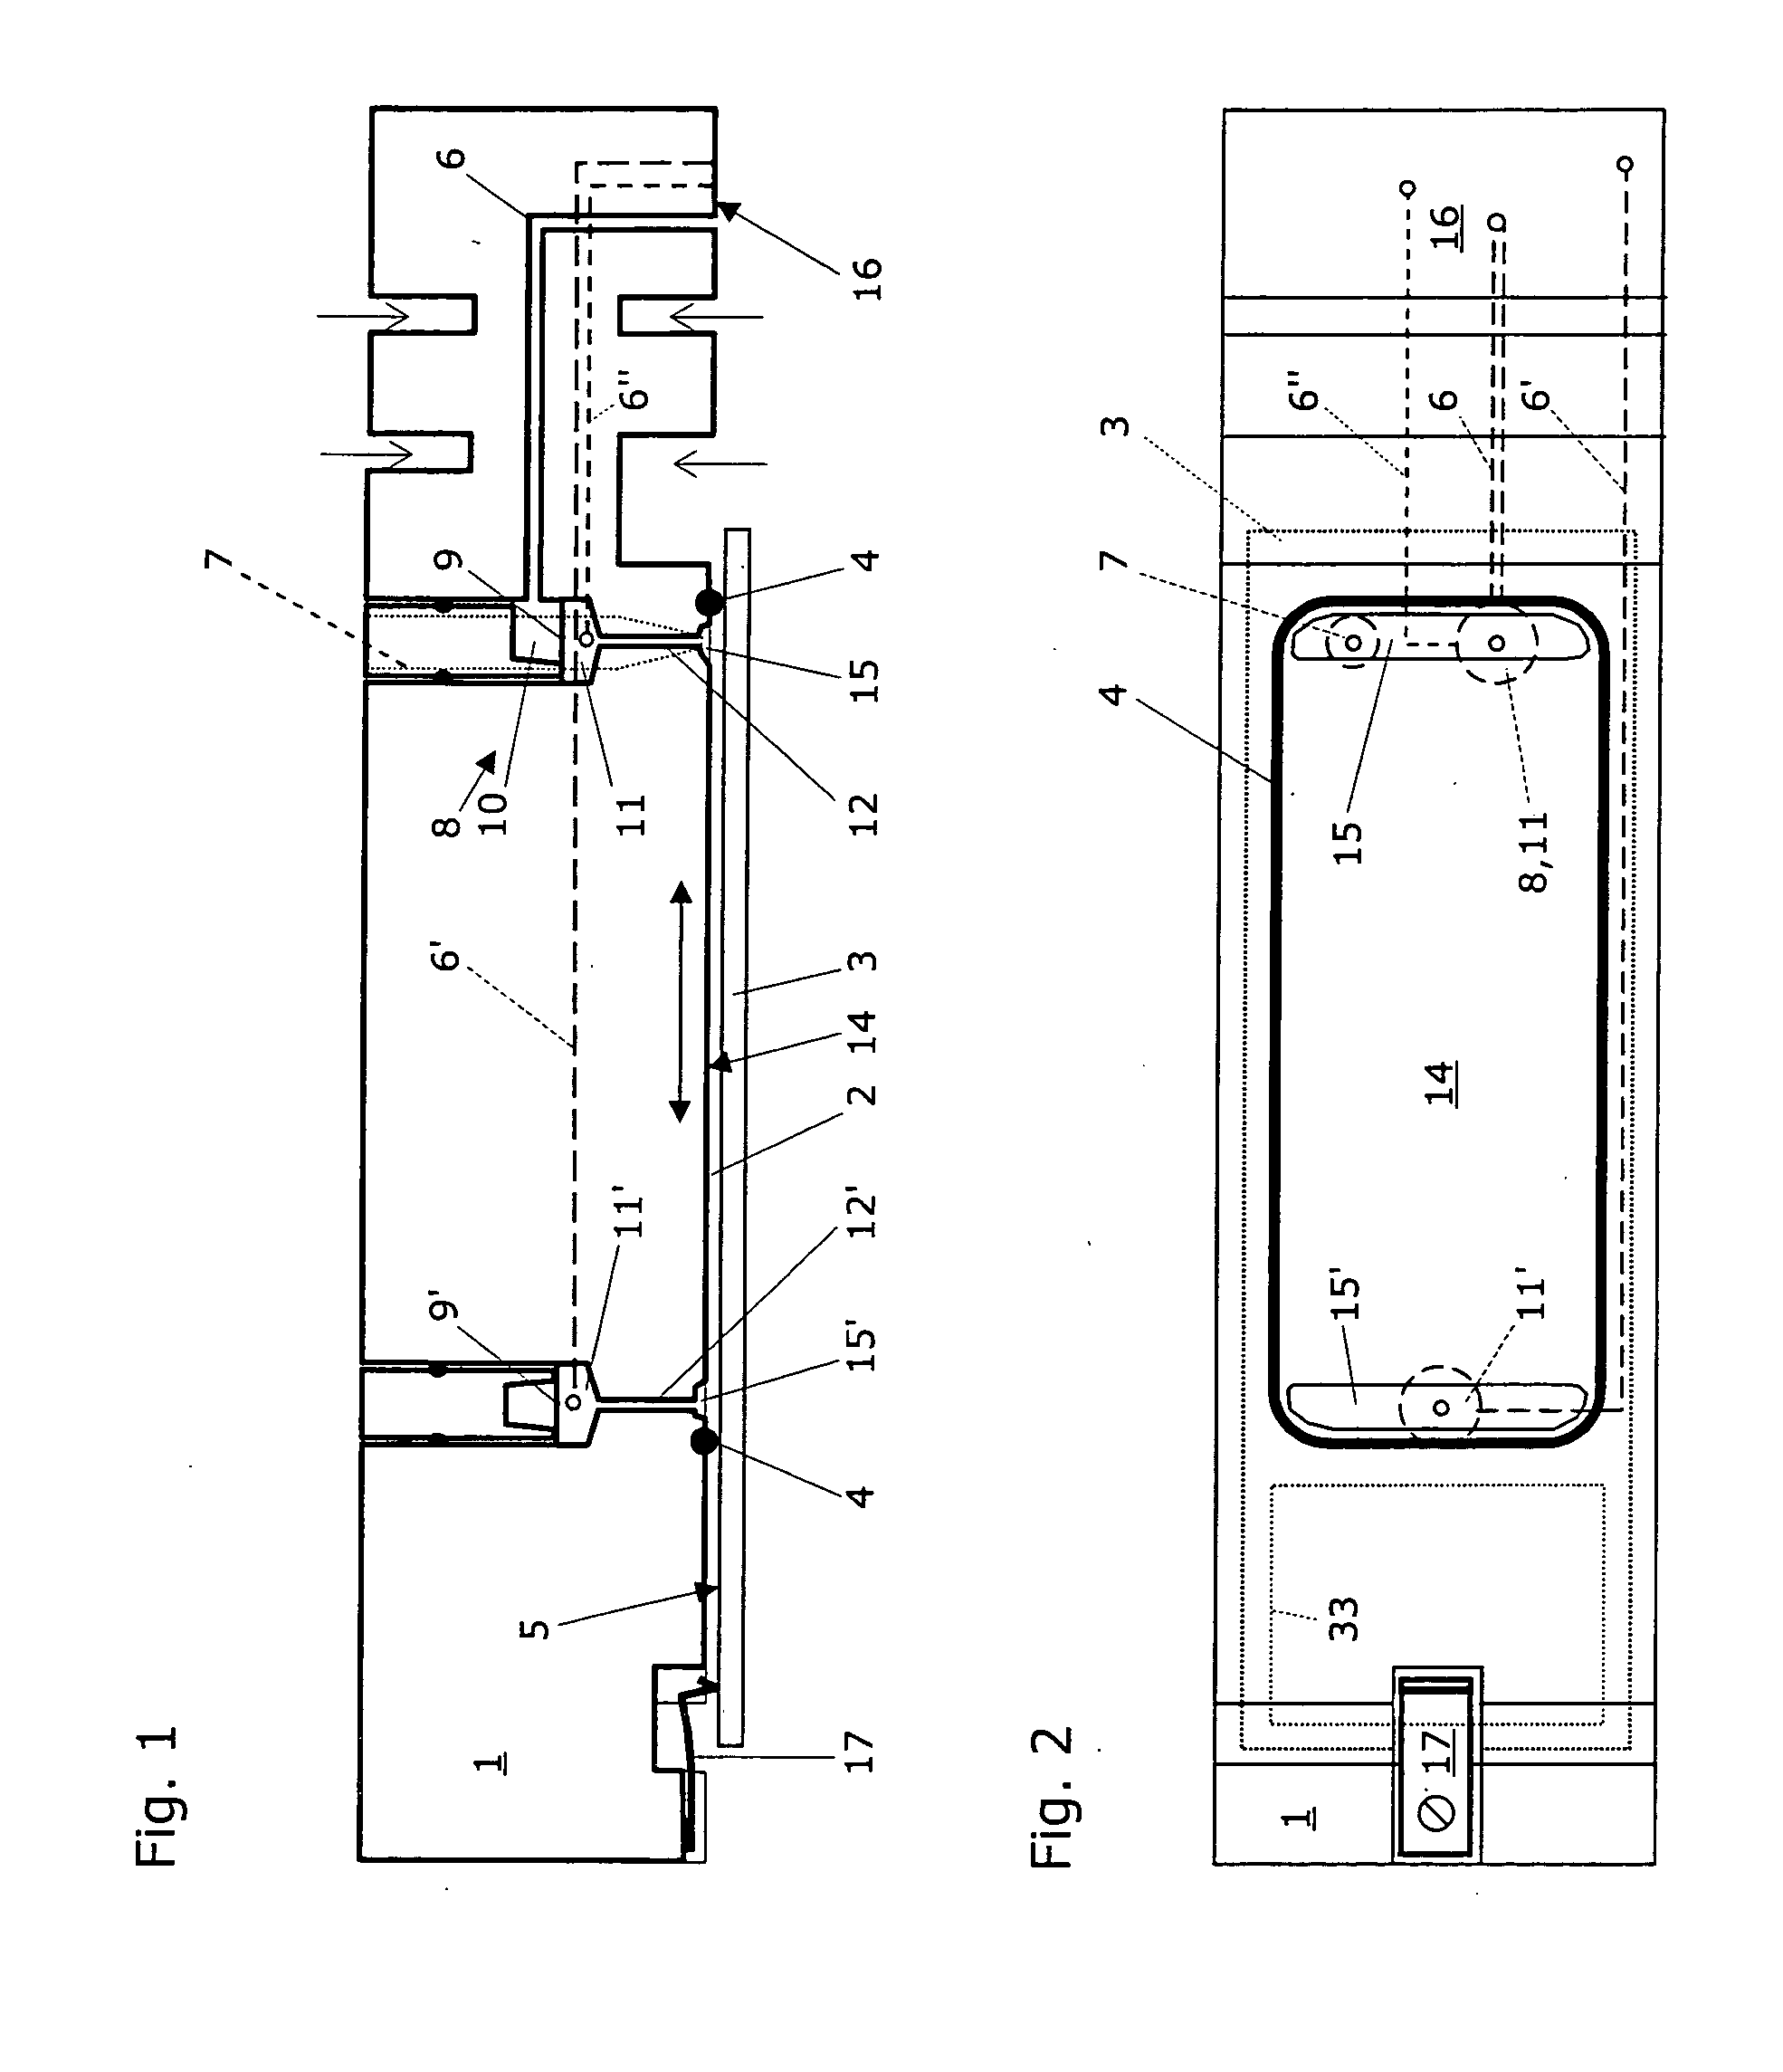 Device and process unit for providing a hybridization chamber